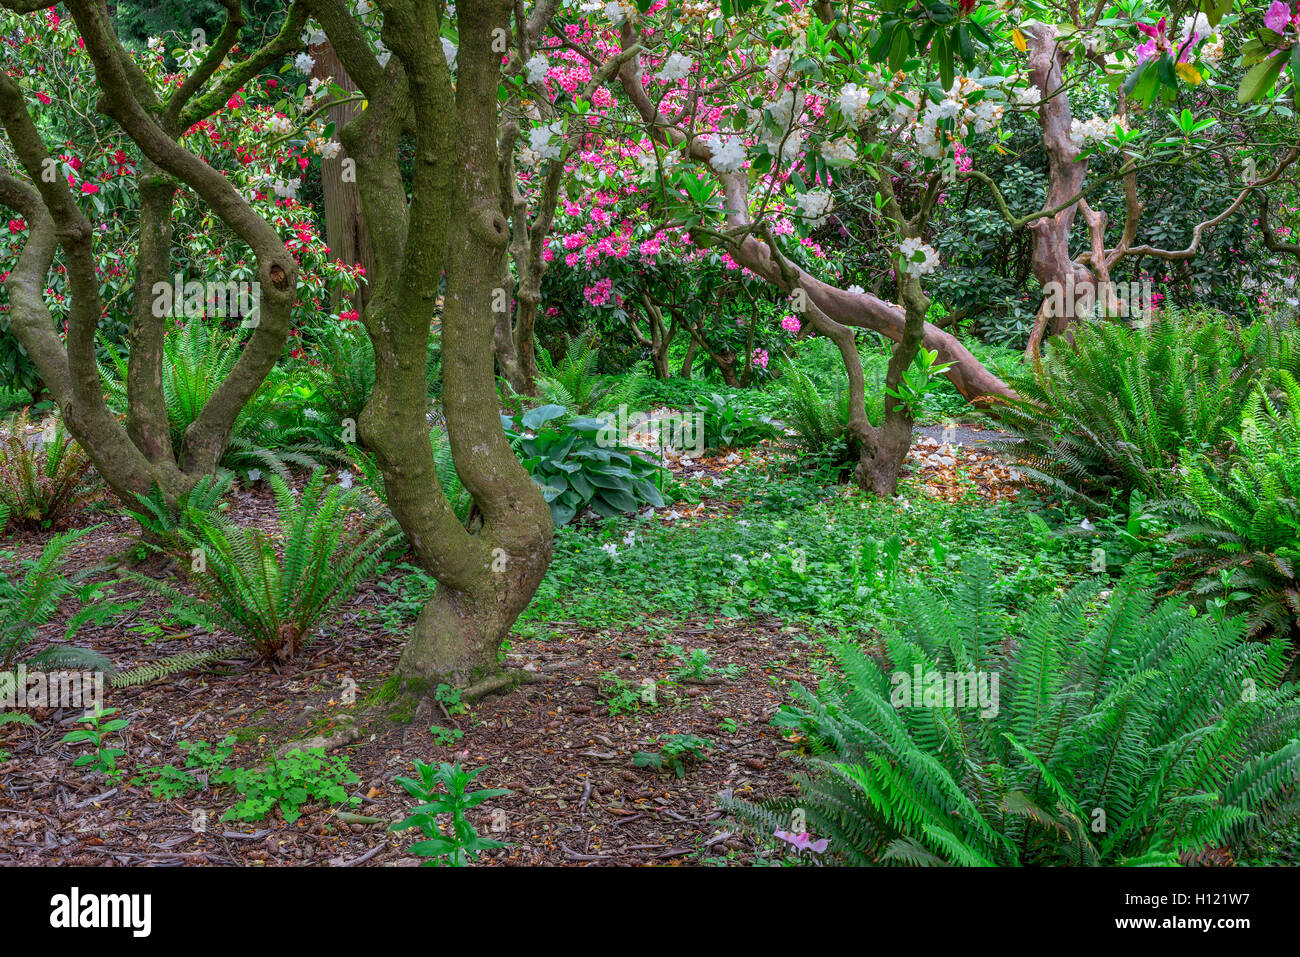 USA, Oregon, Portland, Crystal Springs Rhododendron Garden, Woody branches of rhododendrons in bloom and ferns in understory. Stock Photo